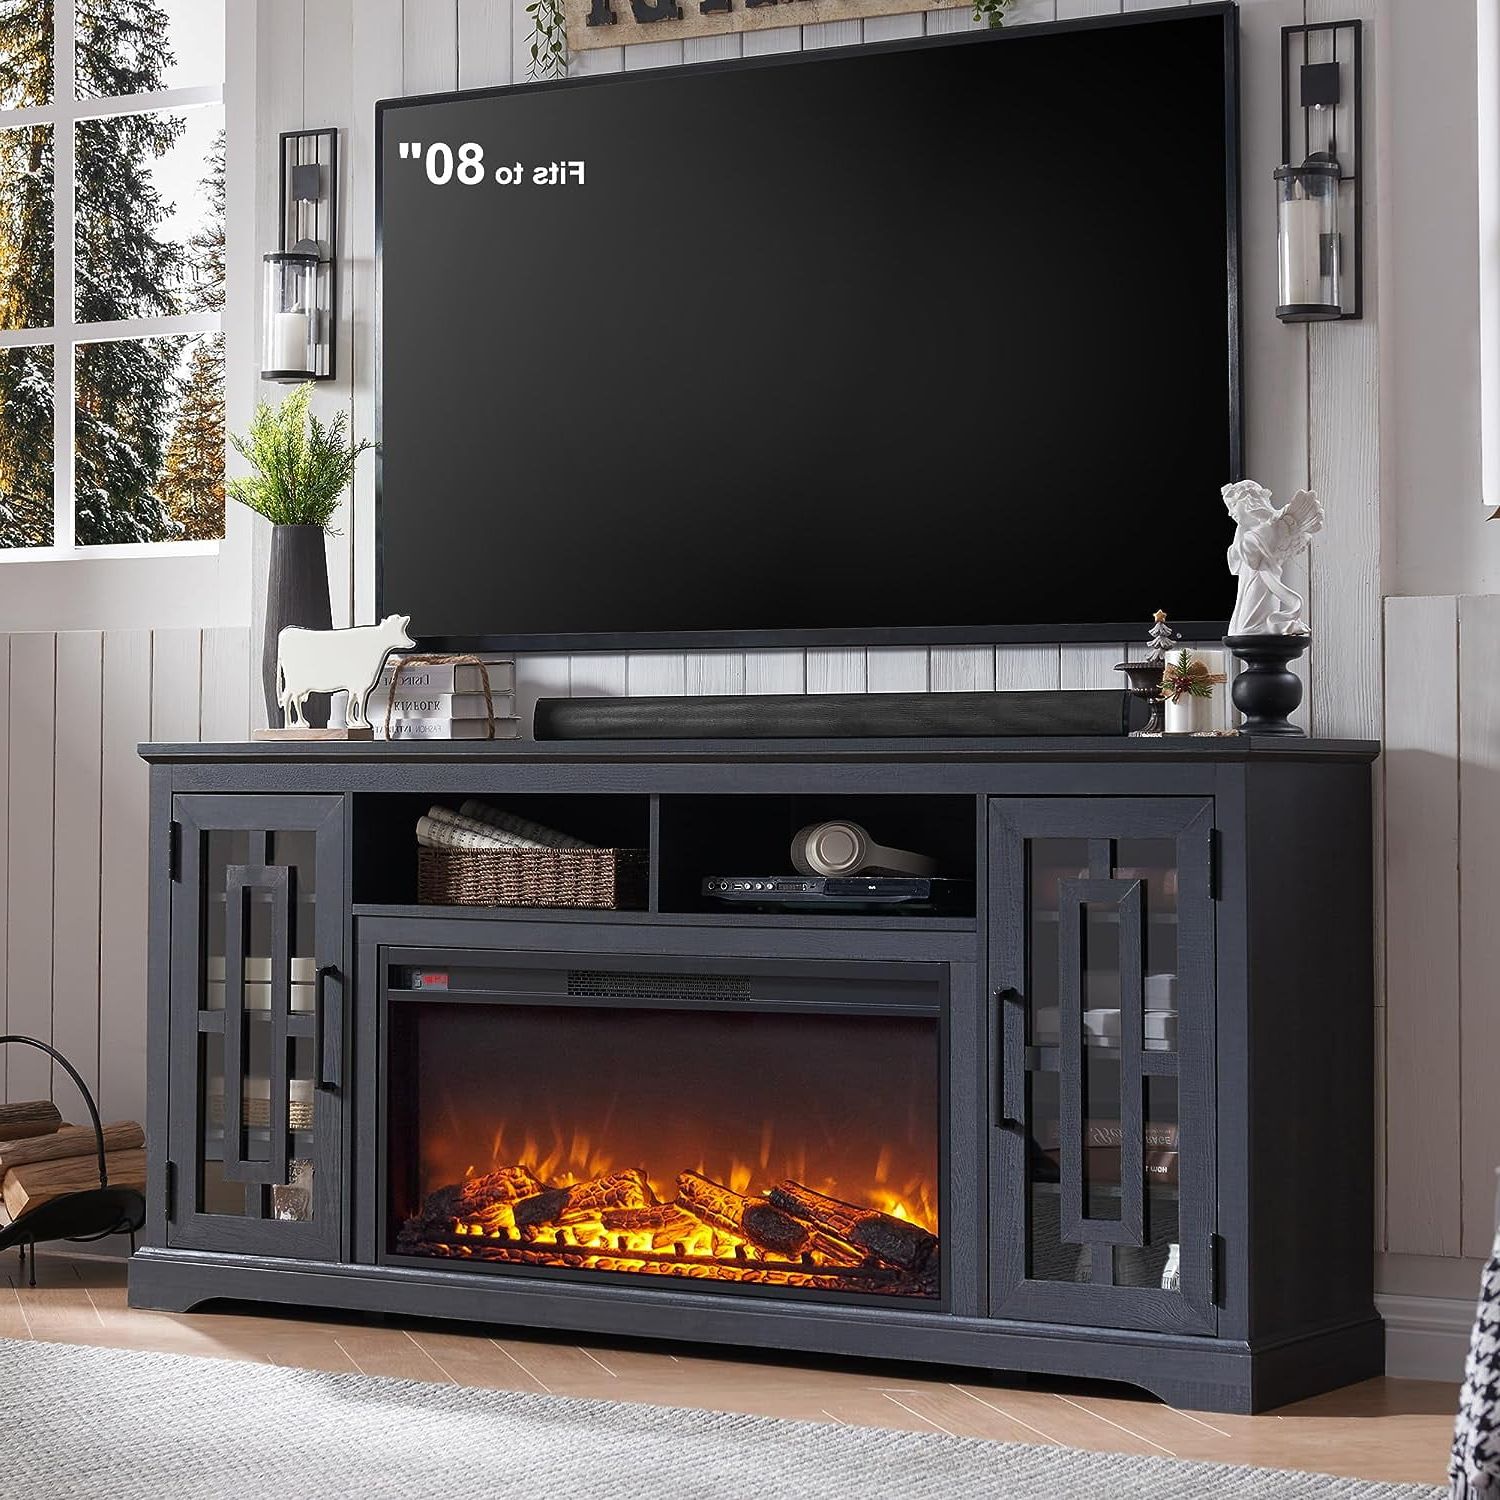 T4tream 70" Fireplace Tv Stand For 75 80 Inch Tv, Farmhouse Highboy  Entertainment Center For Living Room, Black – Walmart Regarding Wood Highboy Fireplace Tv Stands (Gallery 1 of 20)